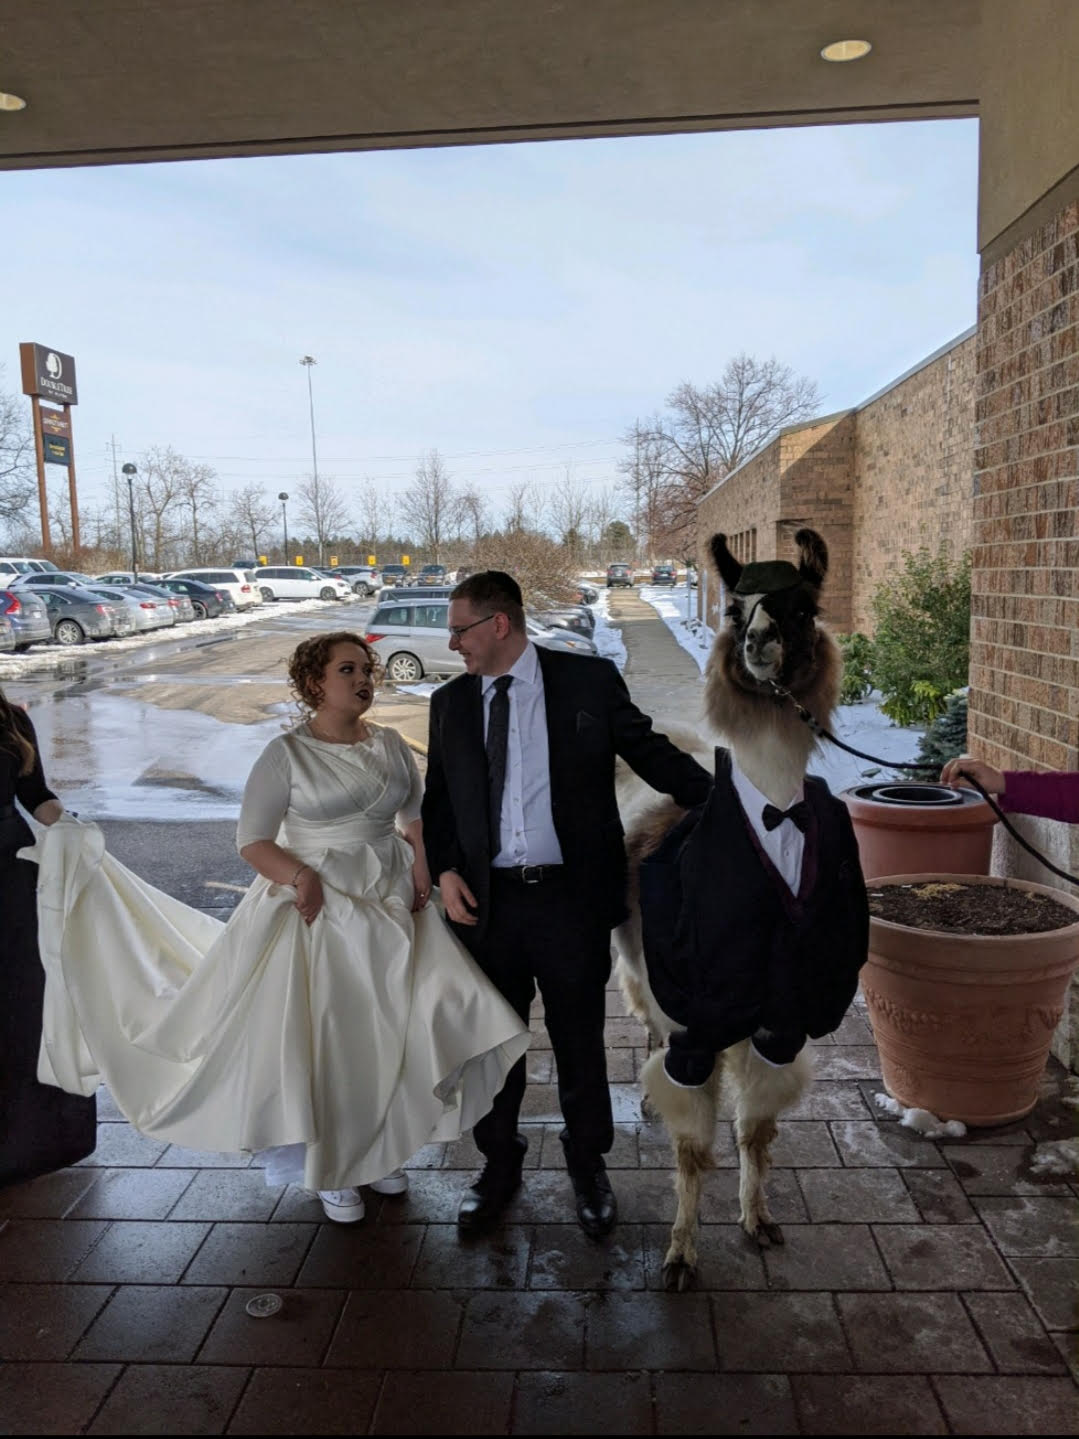 This Man Really Brought A Llama As His Date To His Sister ‘s Wedding